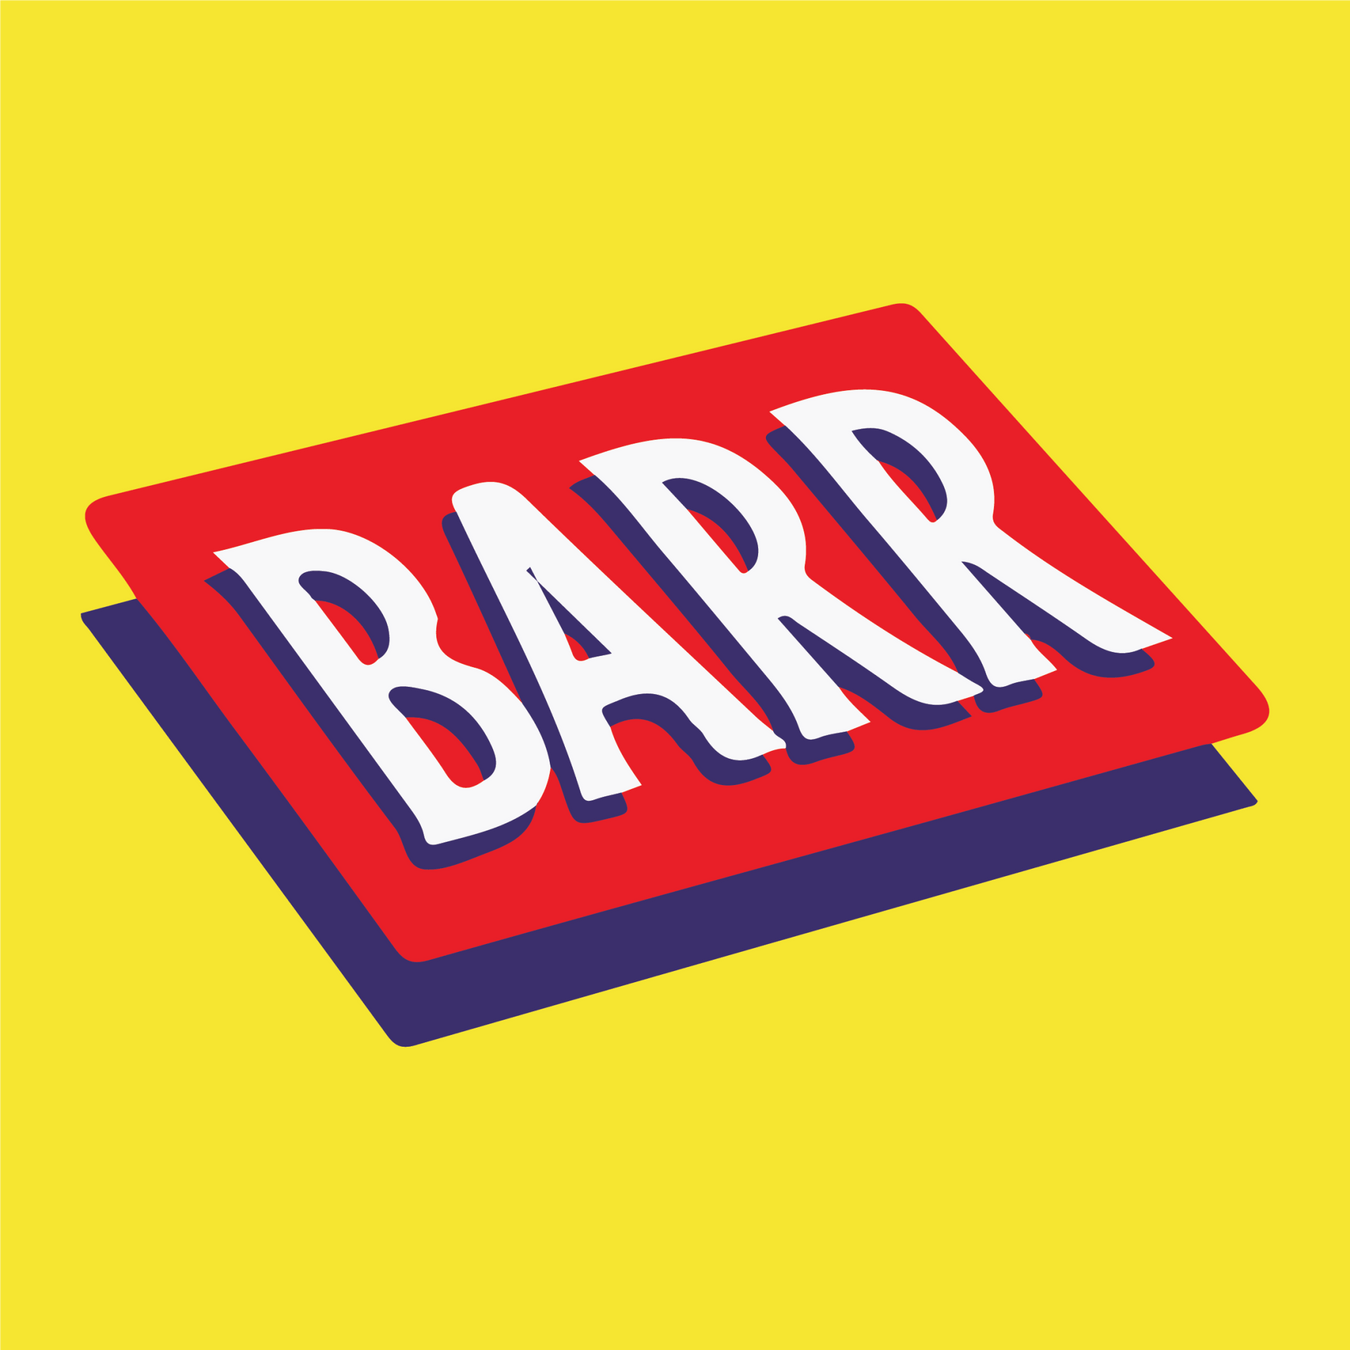 Barr - The Great British Shop